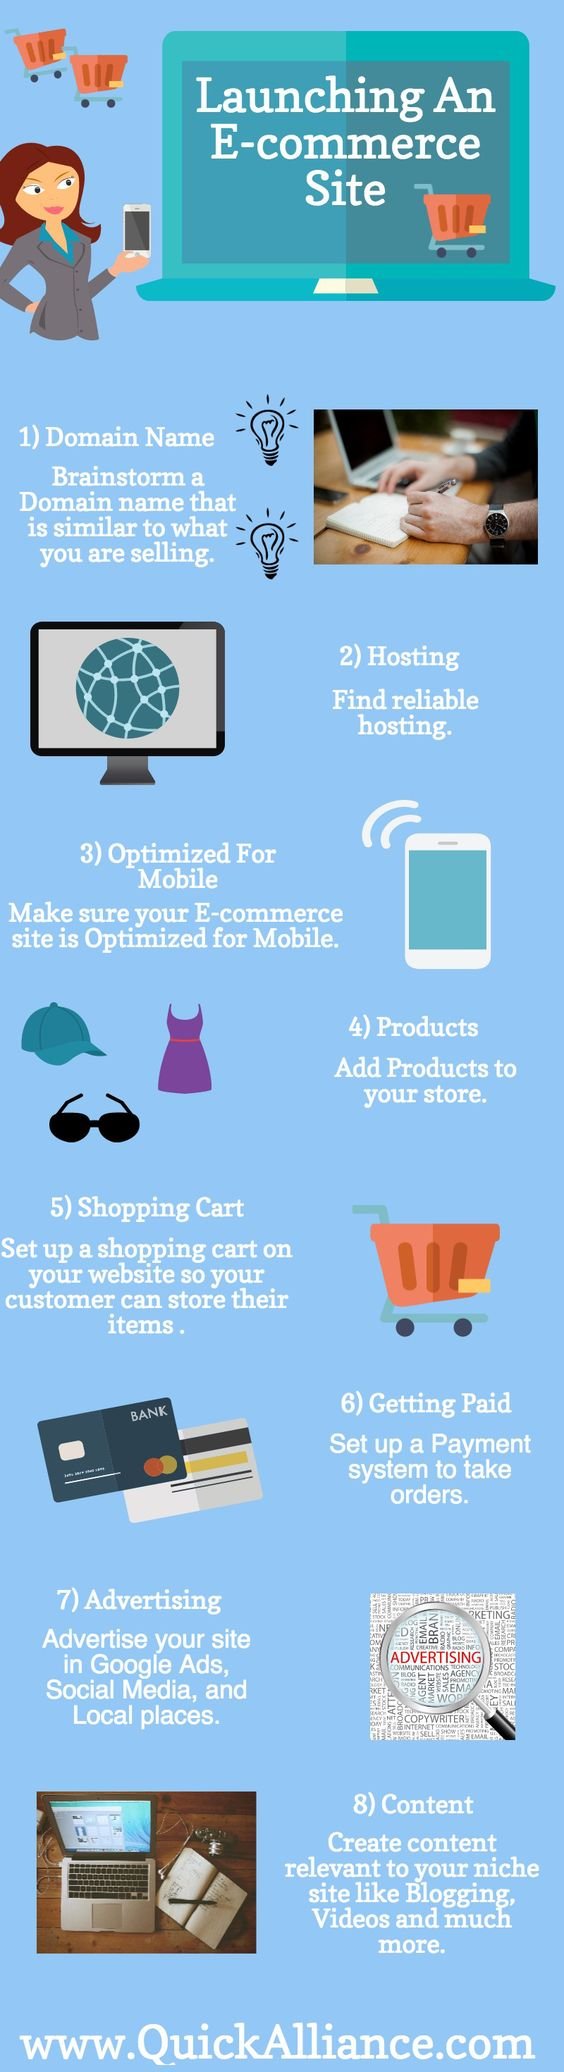 8 Steps To Launch A Successful E-commerce Site 2-7-17.jpg